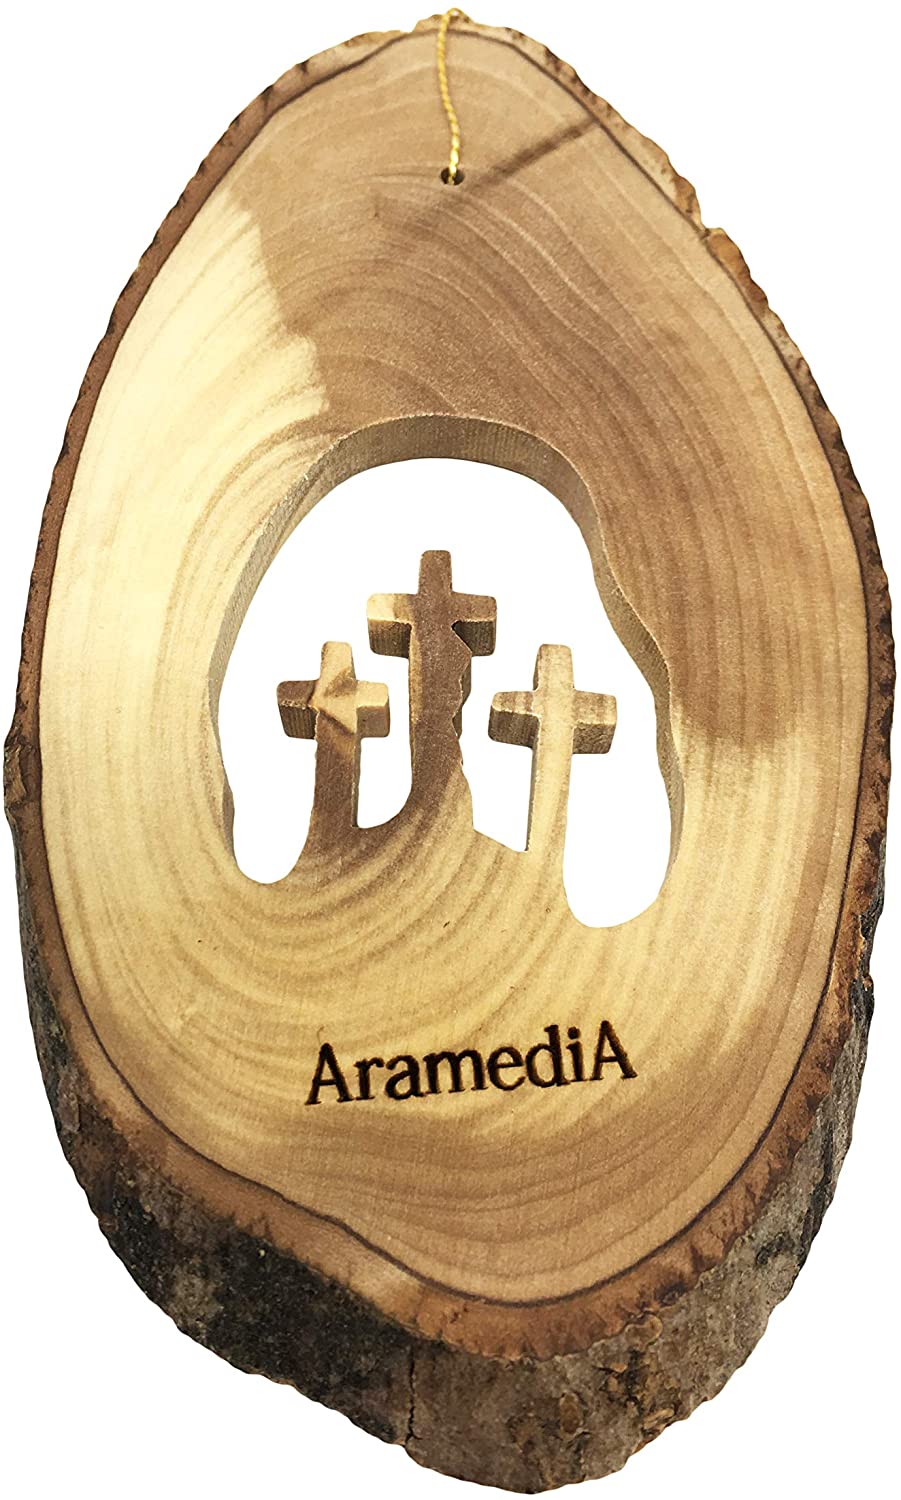 AramediA Olive Wood Handcrafted Christmas Crosses Ornament in The Holy Land by Artisans - 5